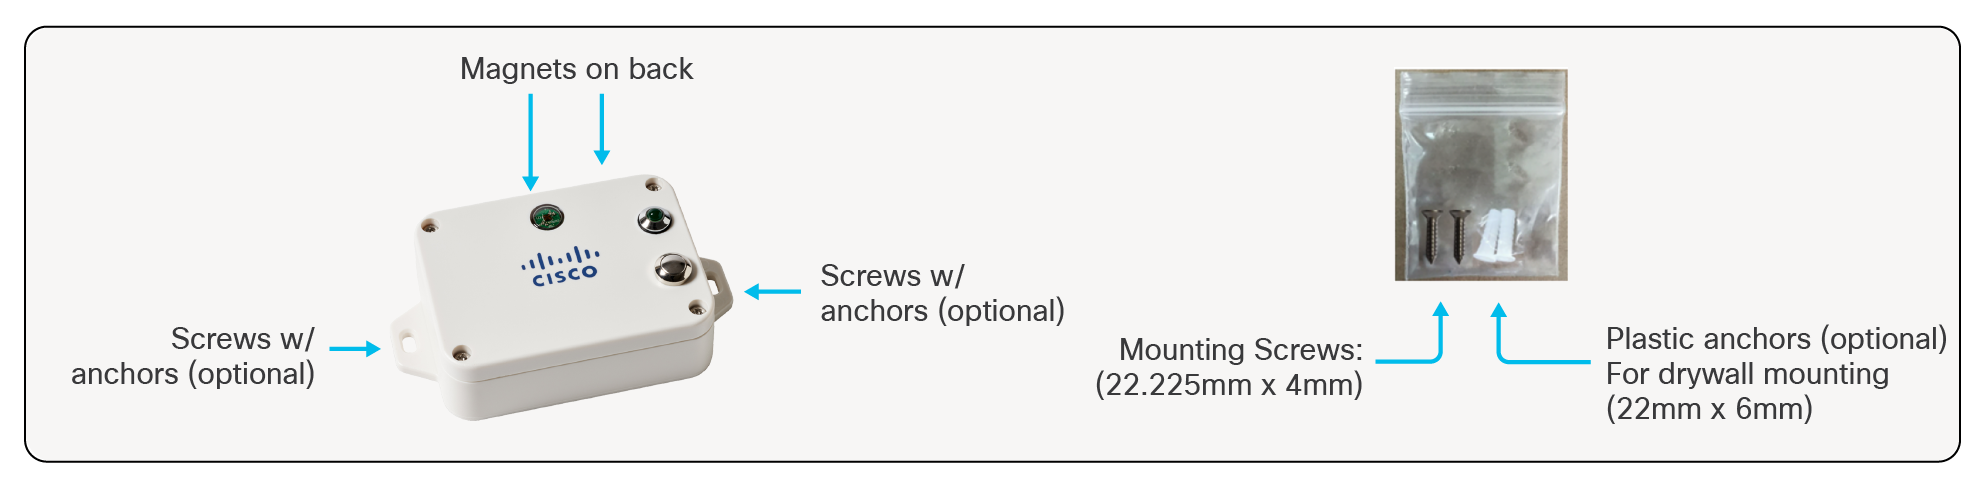 Mounting Accessories and Methods AV206